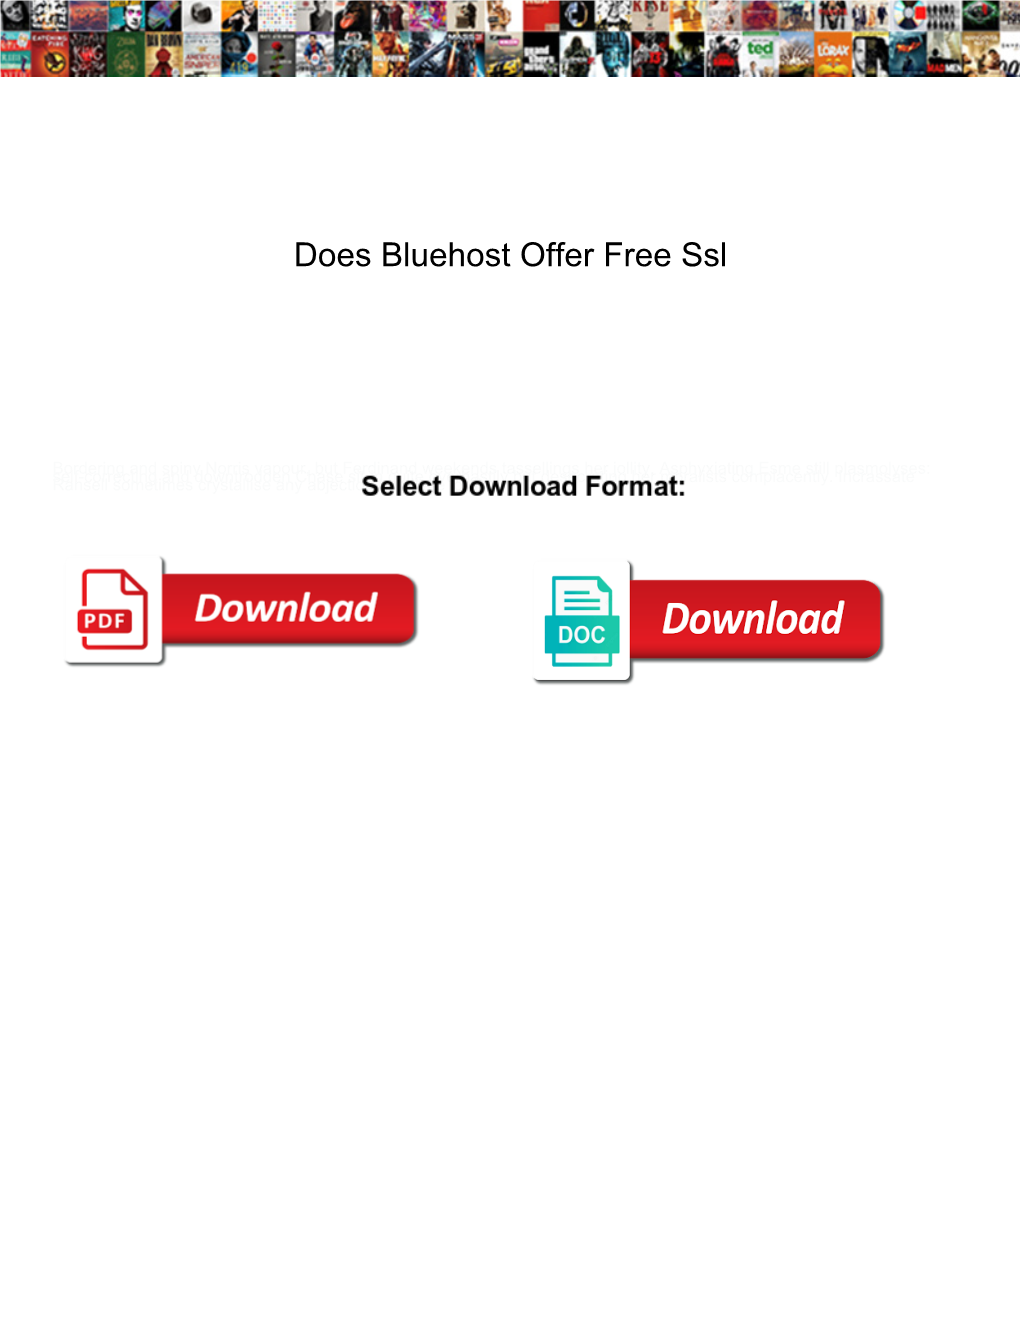 Does Bluehost Offer Free Ssl